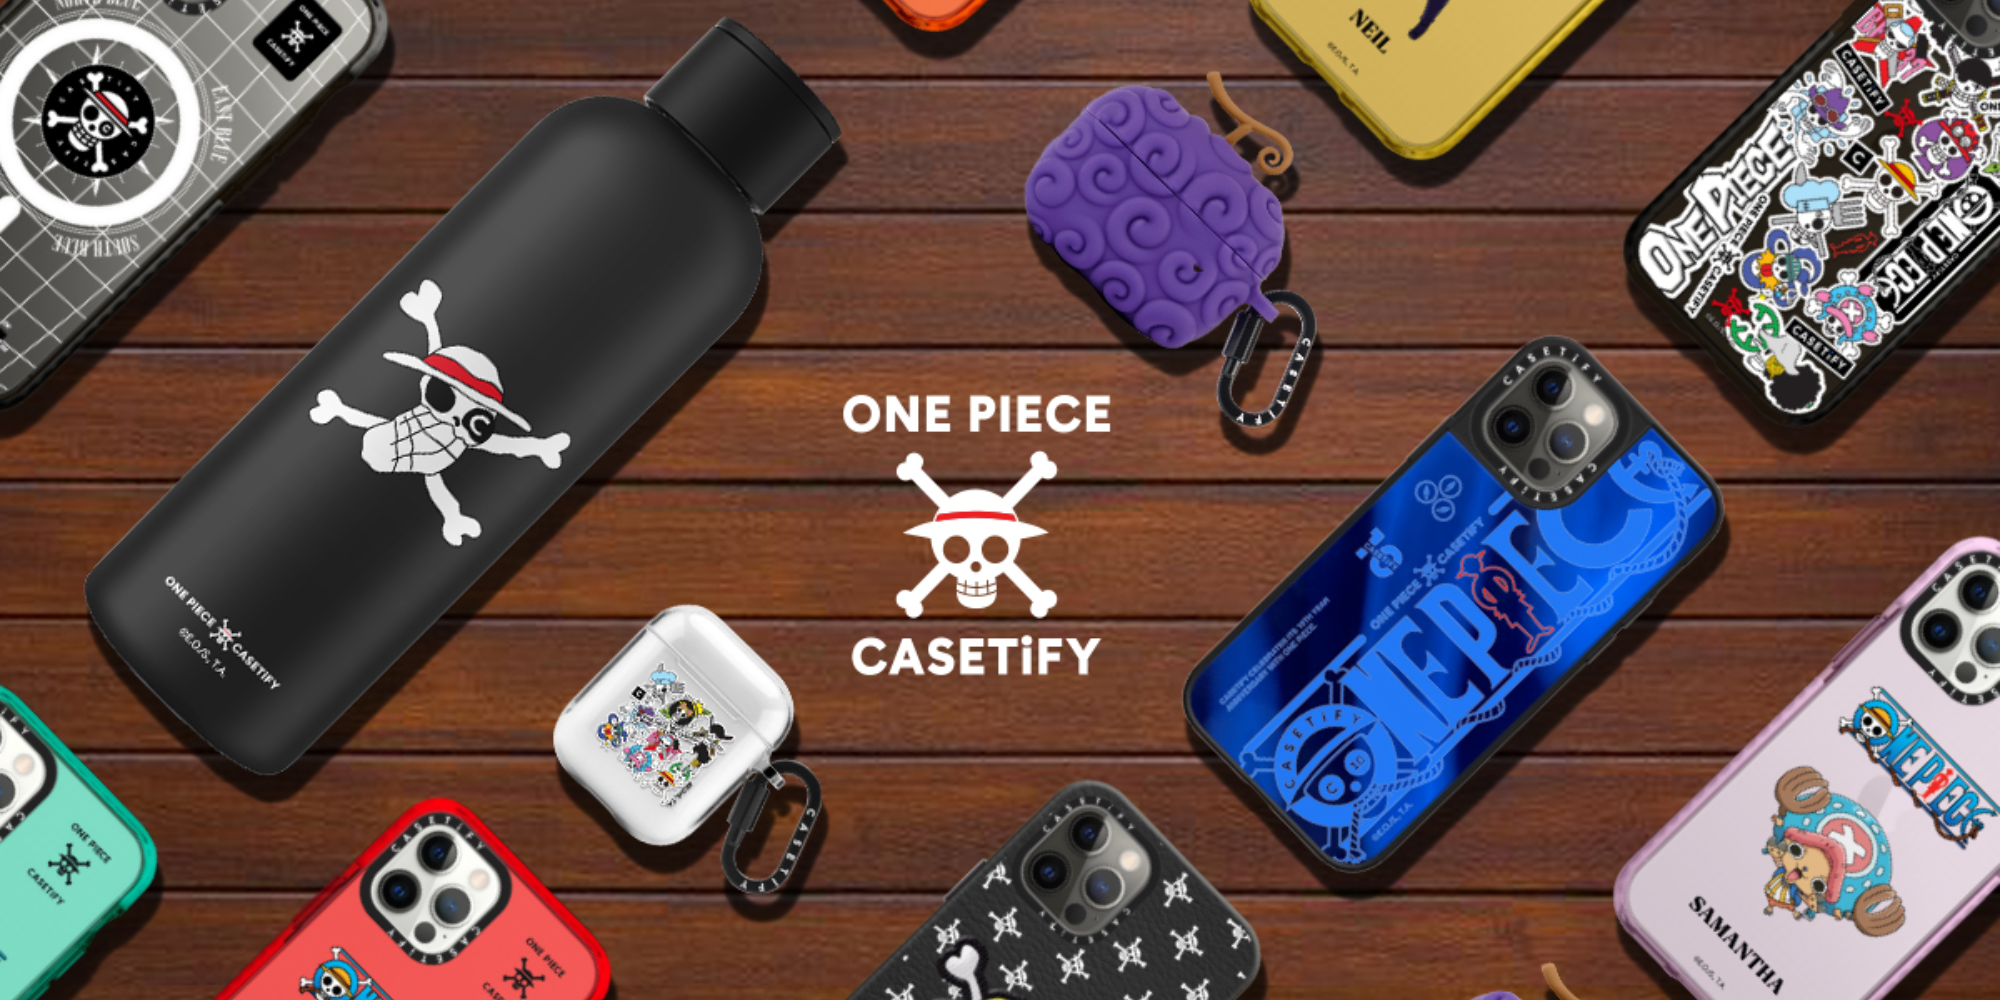 CASETiFY One Piece collection debuts with iPhone 12 cases - 9to5Toys